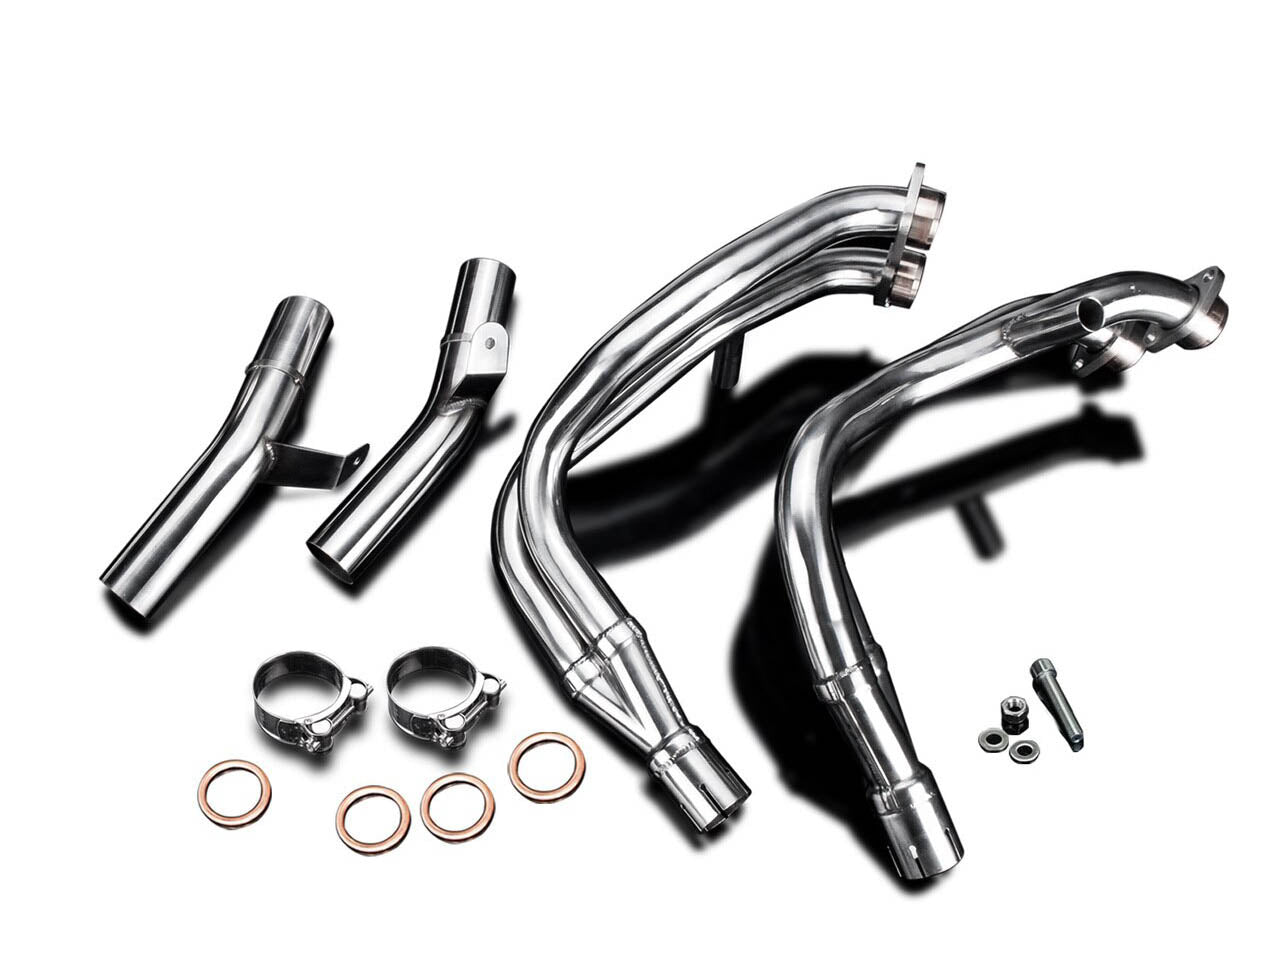 DELKEVIC Suzuki GSXR1300 Hayabusa (99/07) Full 4-2 Exhaust System with DS70 9" Carbon Silencers